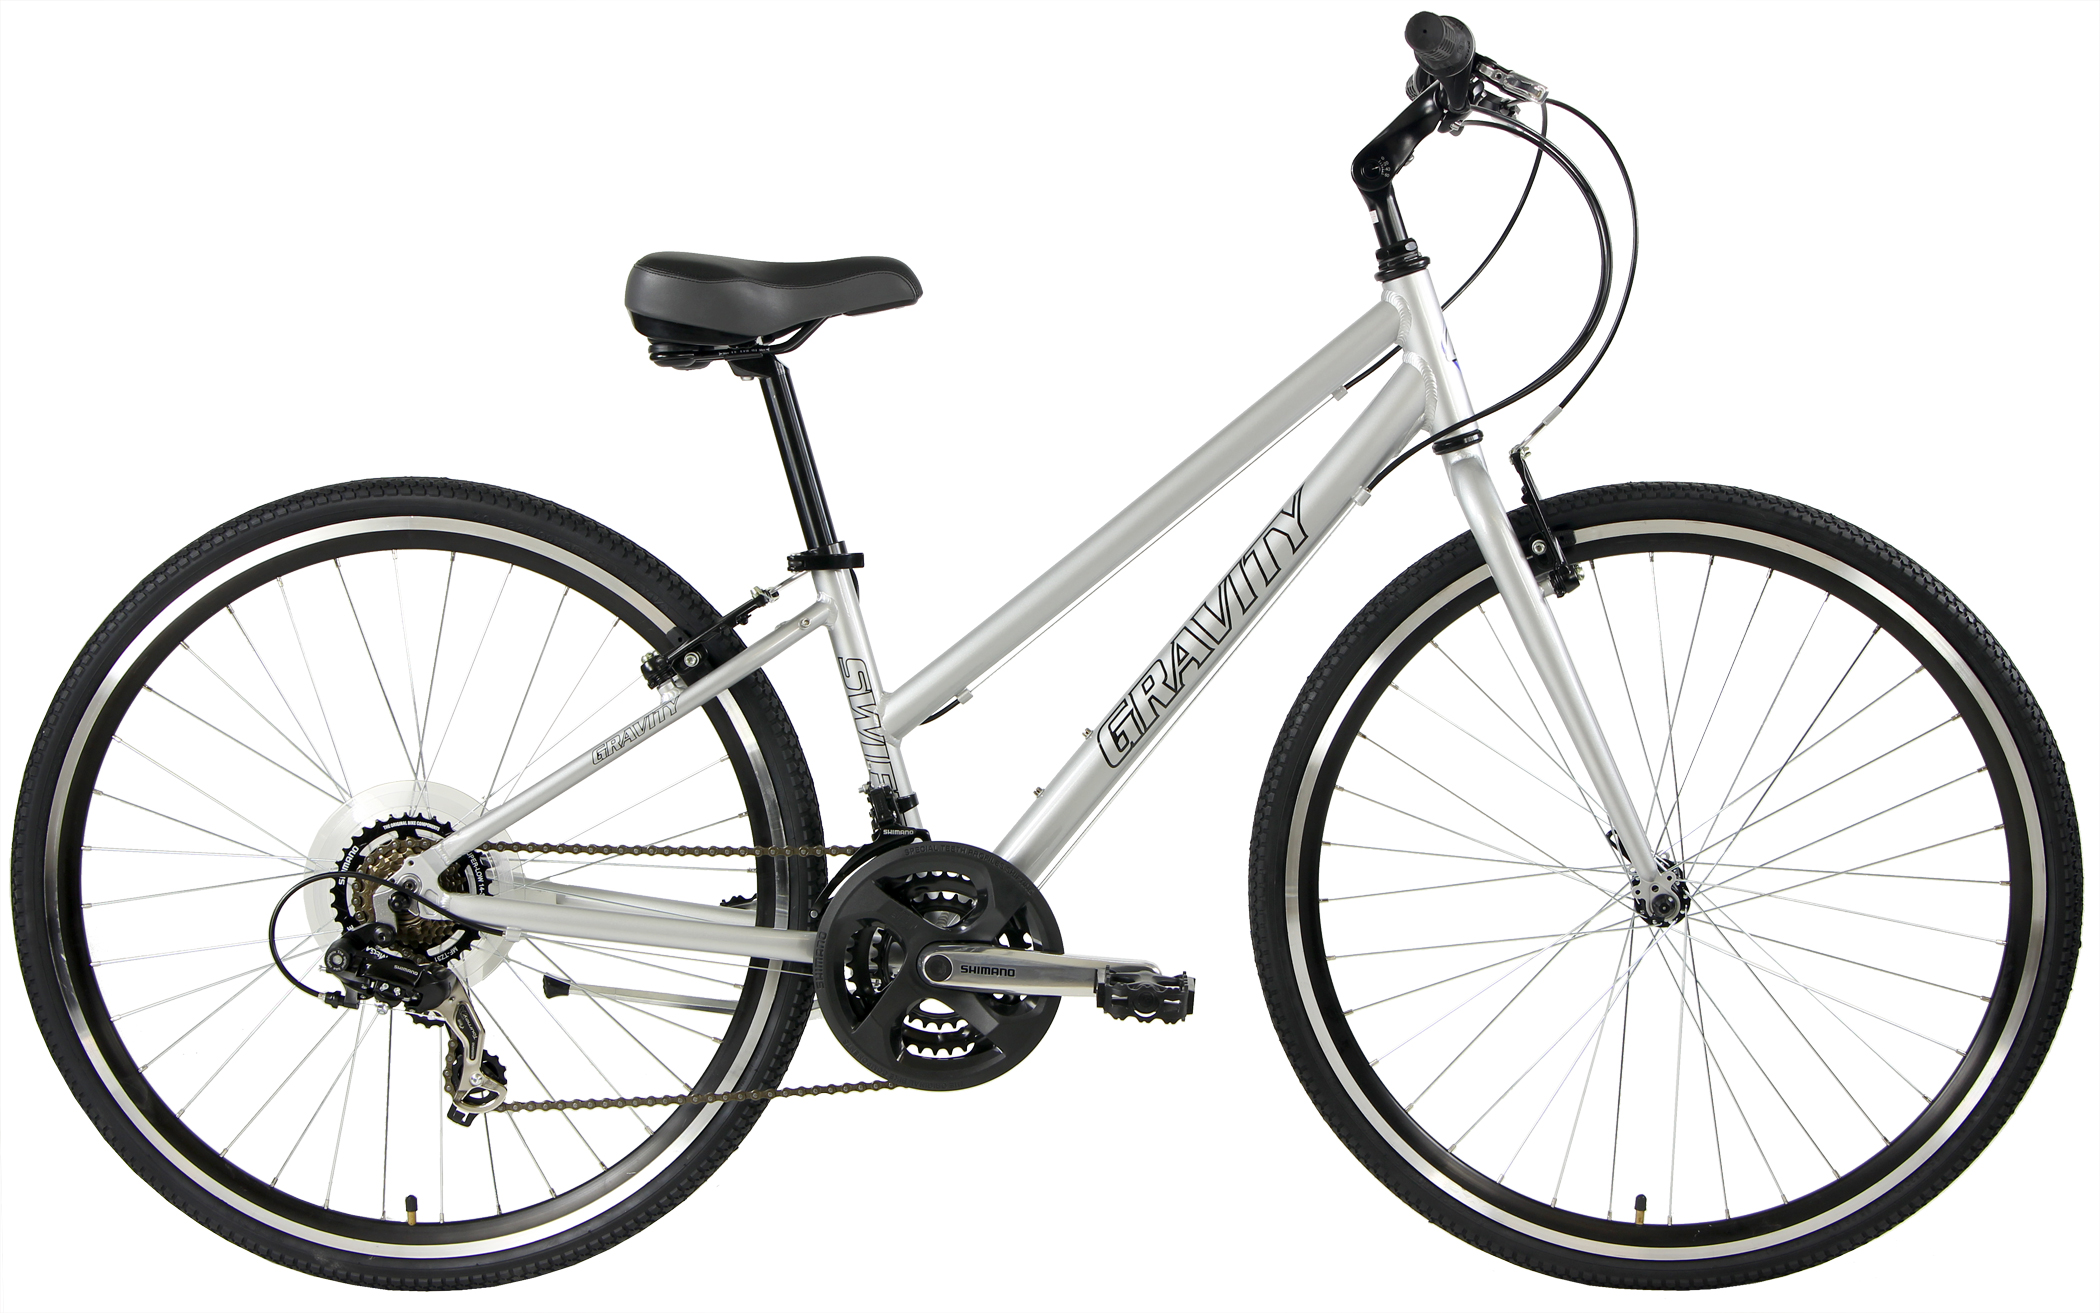 Save up to 60% off new Flat Bar Hybrid Bikes